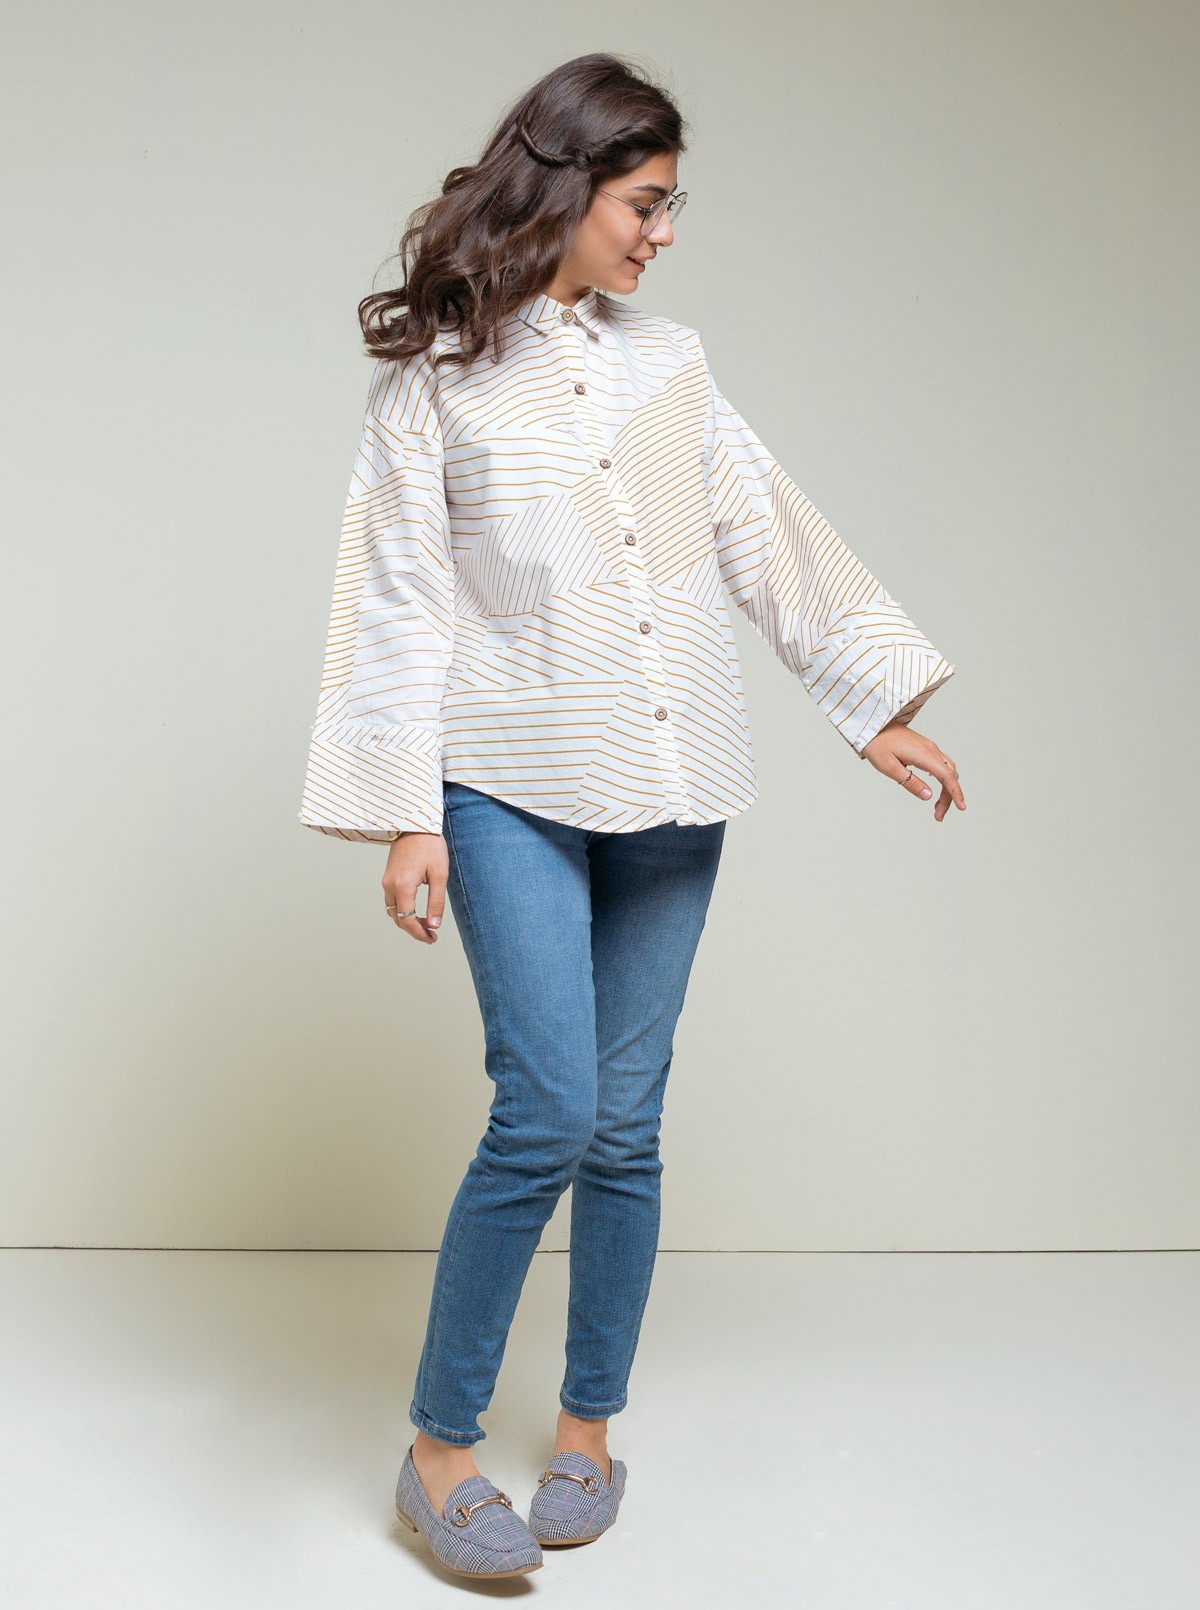 /2019/05/beechtree-absolute-collection-cotton-top-btw18-m4-abw-19-must-image1.jpeg